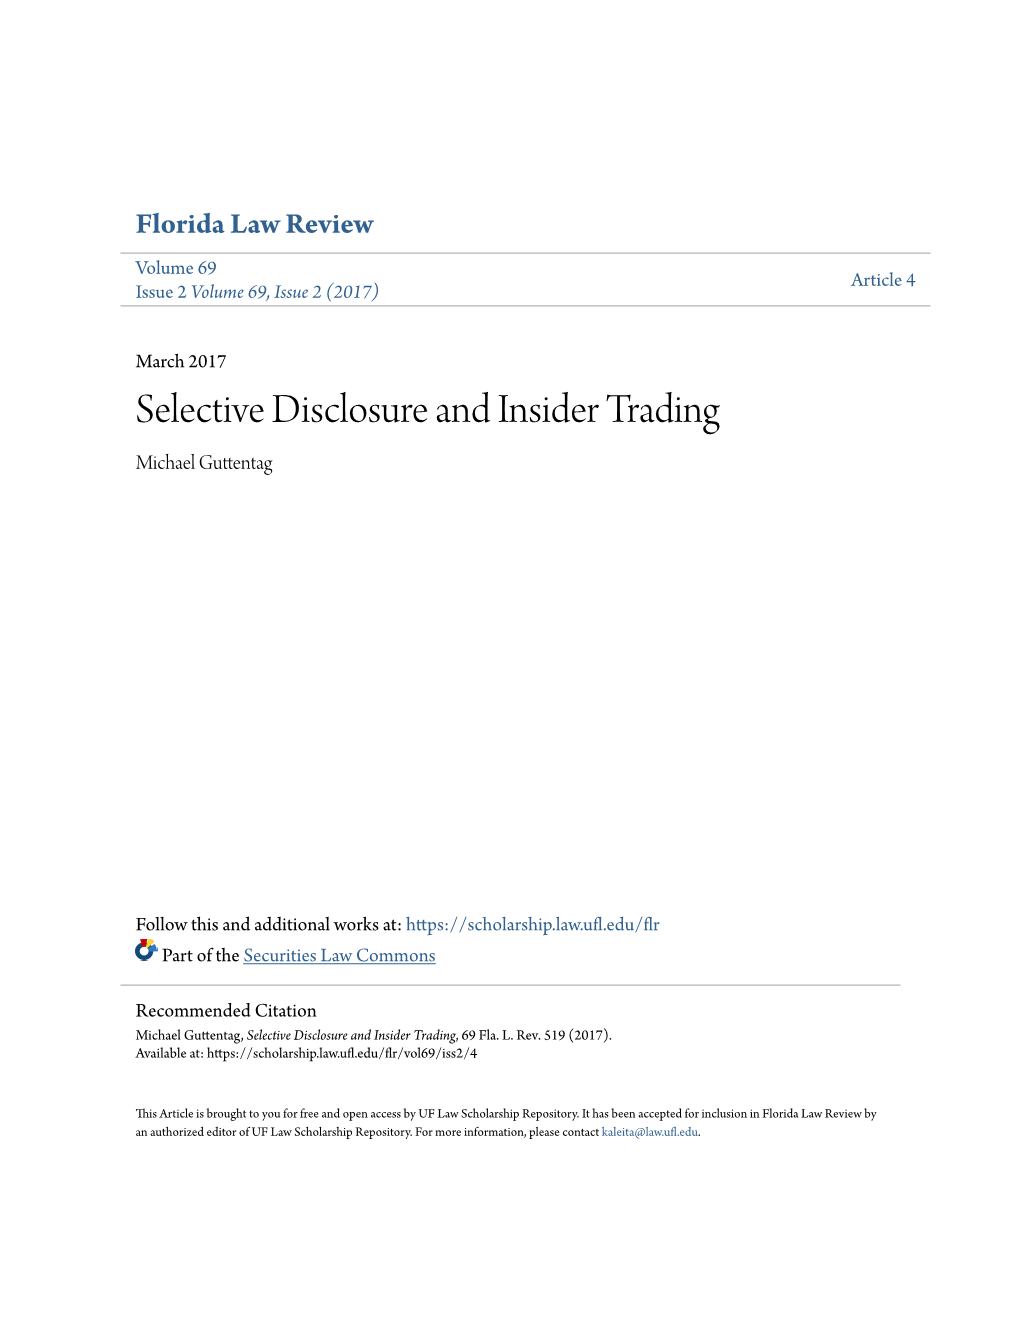 Selective Disclosure and Insider Trading Michael Guttentag